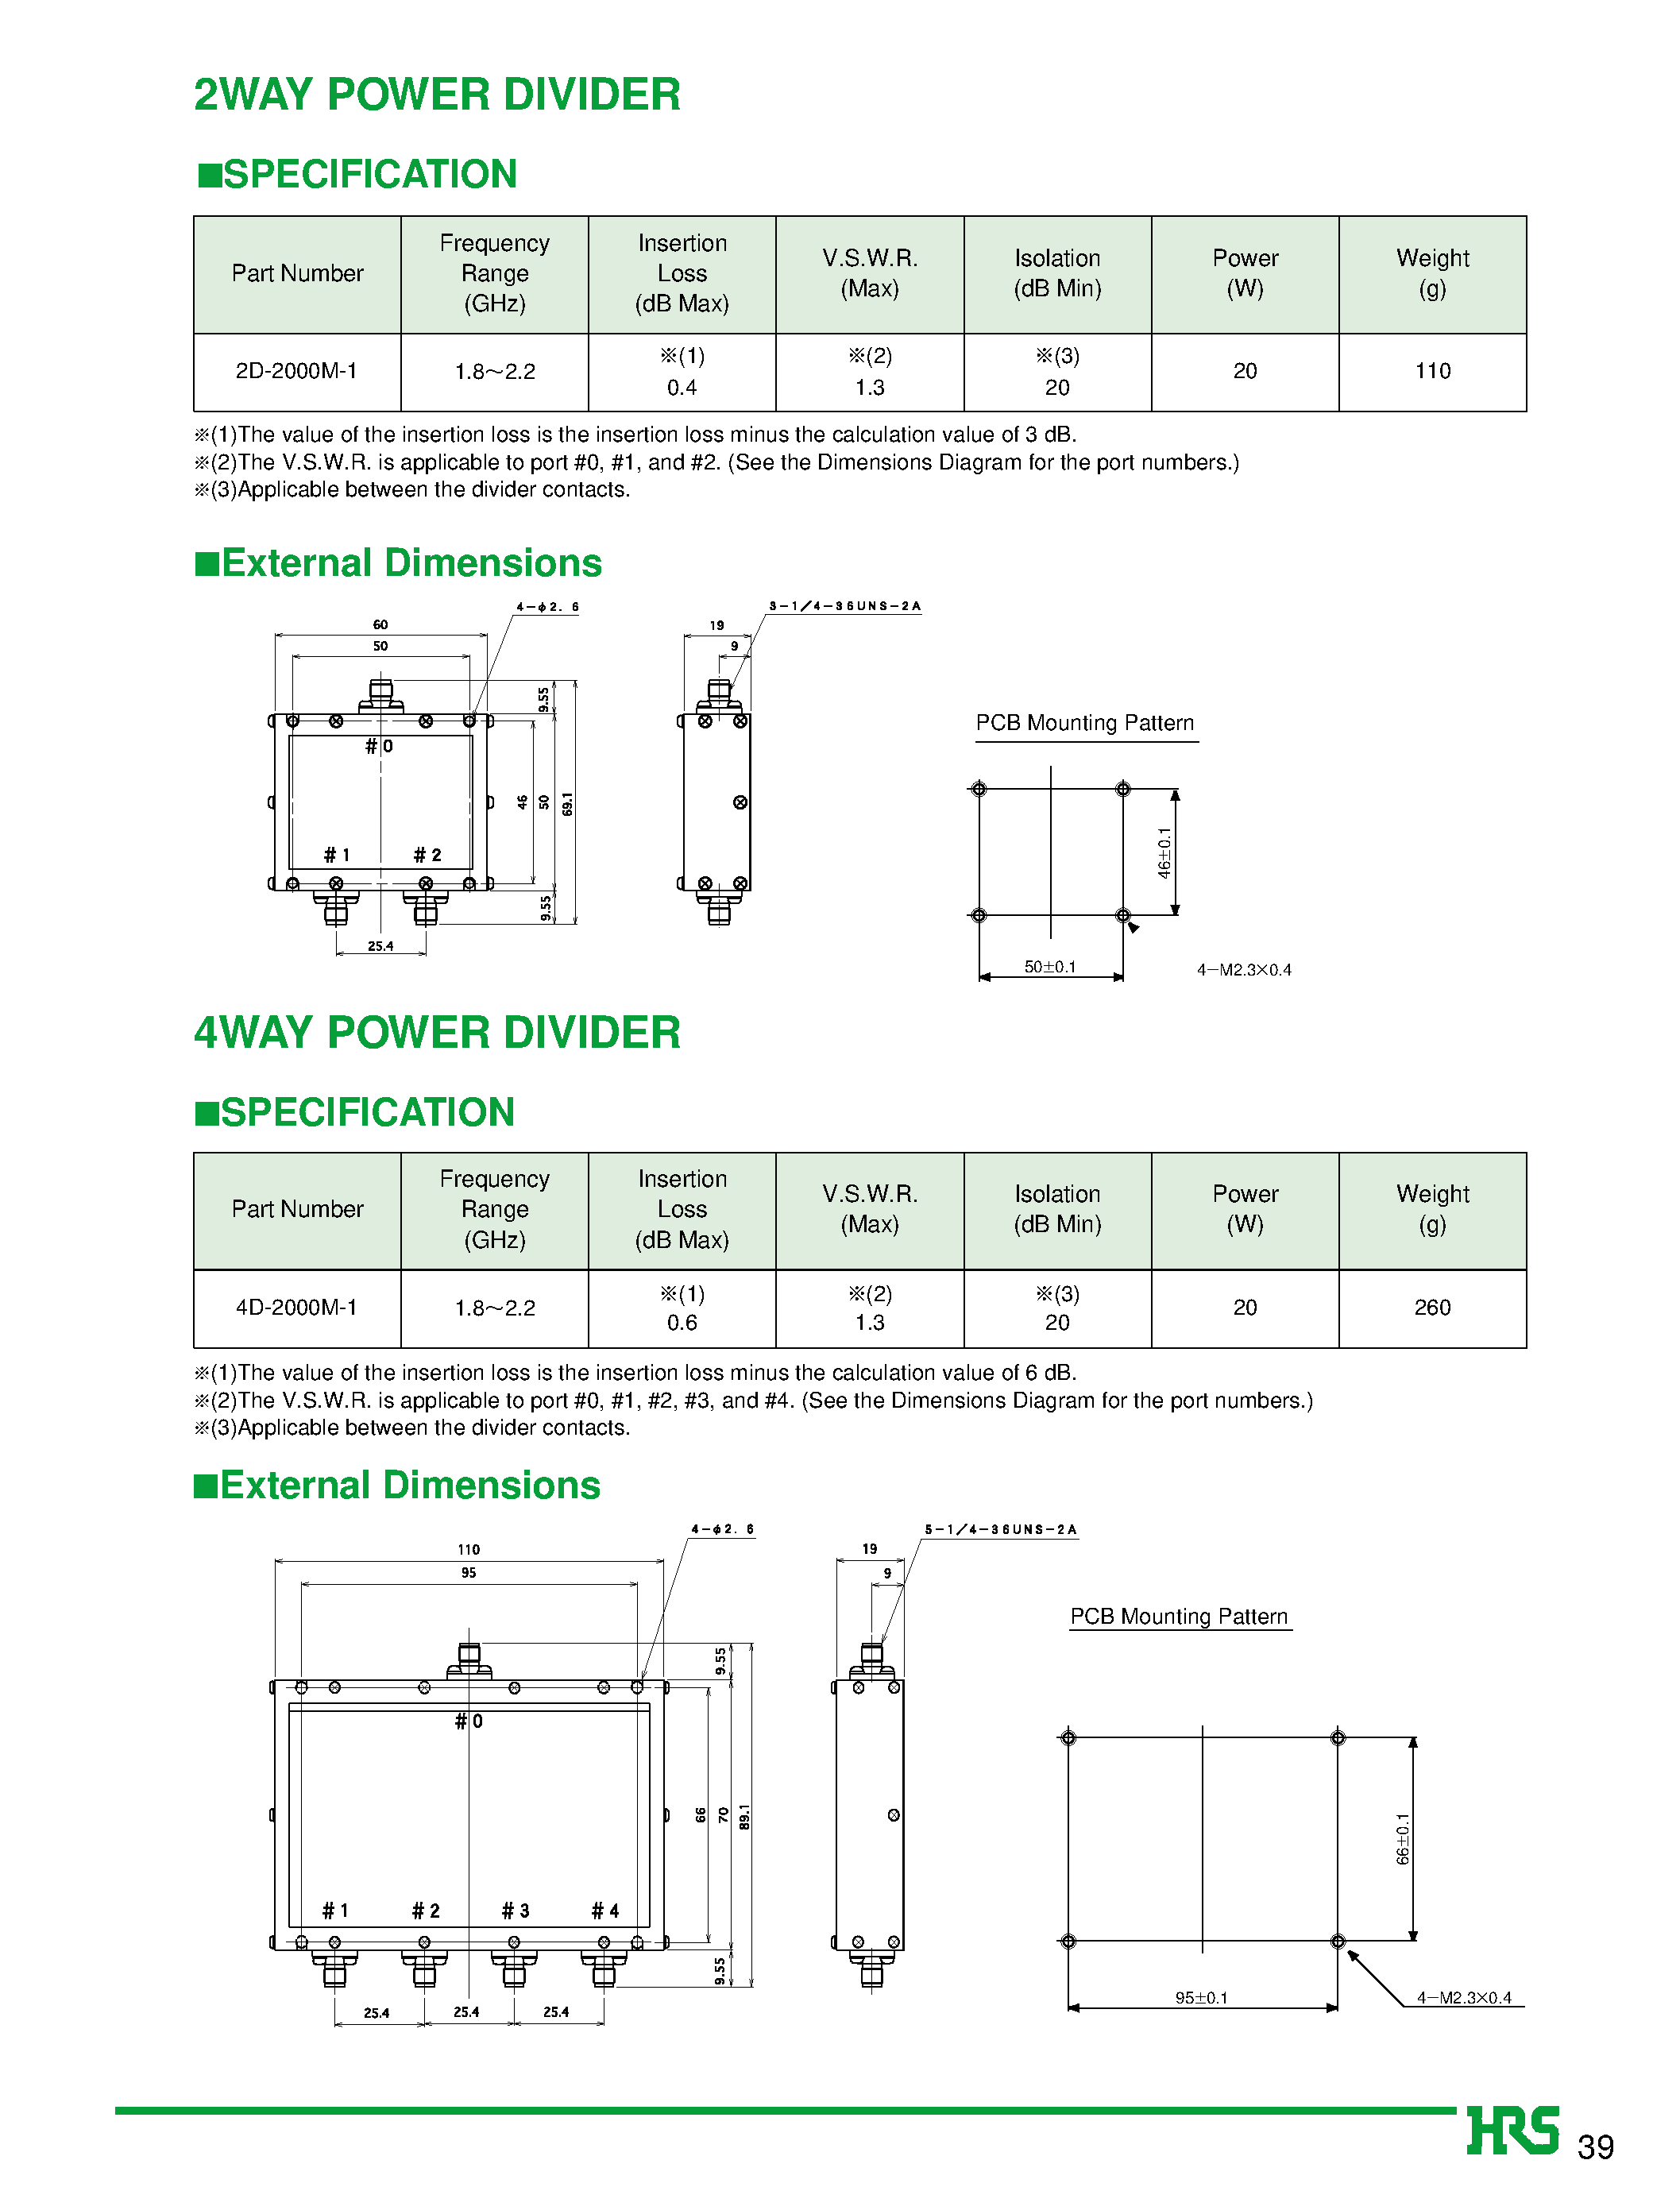 Даташит 2D-2000M-1-2 GHz Band Power Dividers/Combiners страница 2